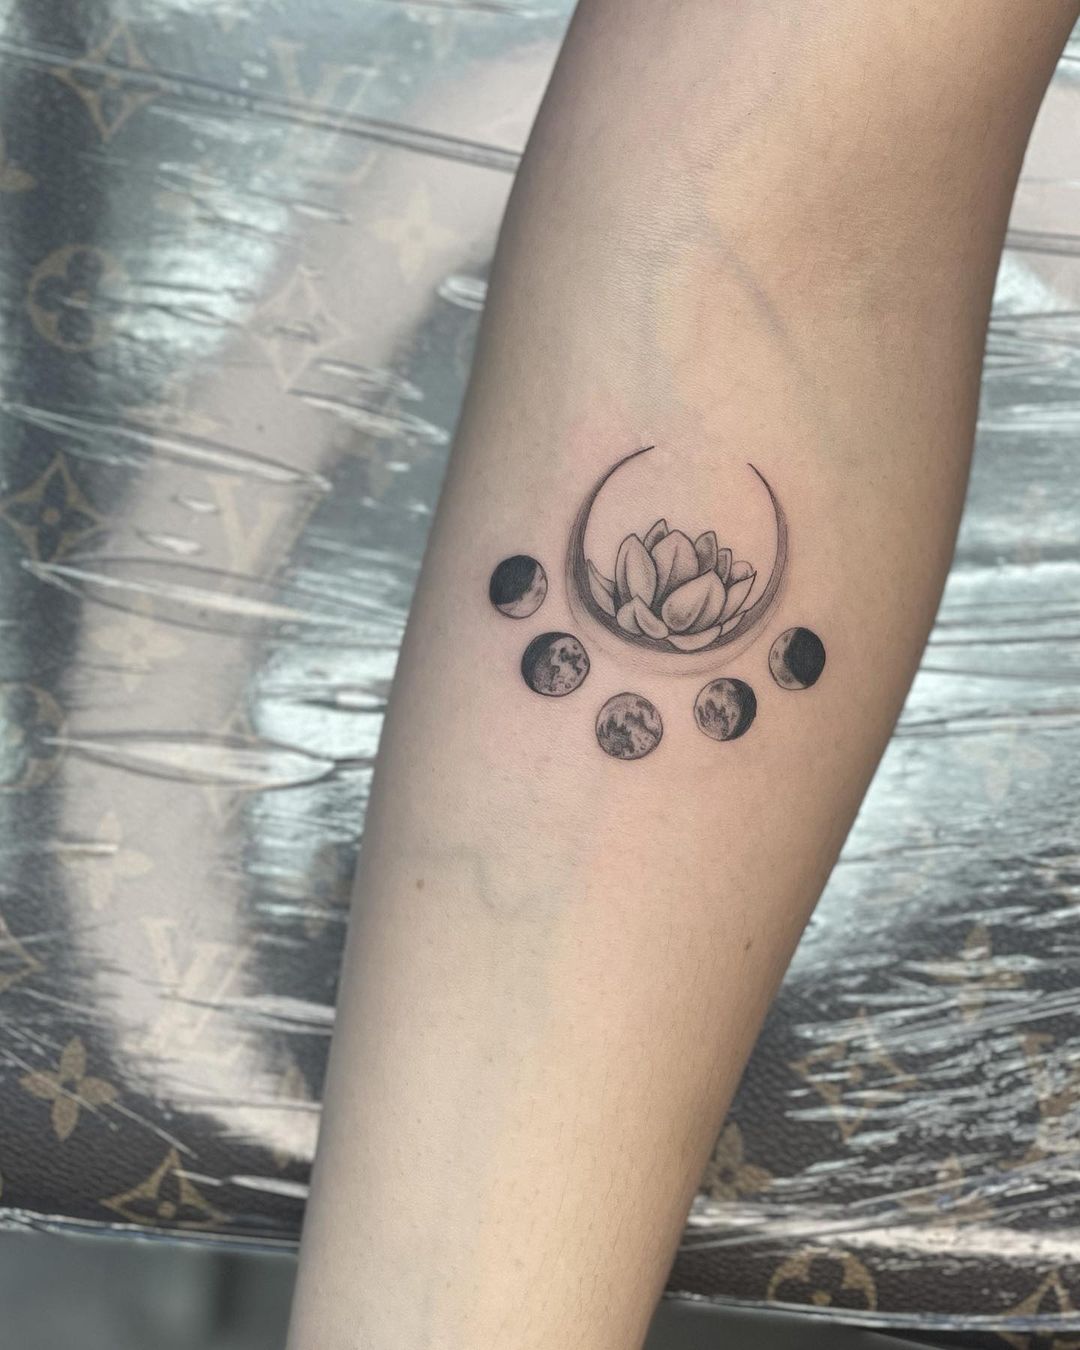 Lotus Flower With Moon Phases Tattoo